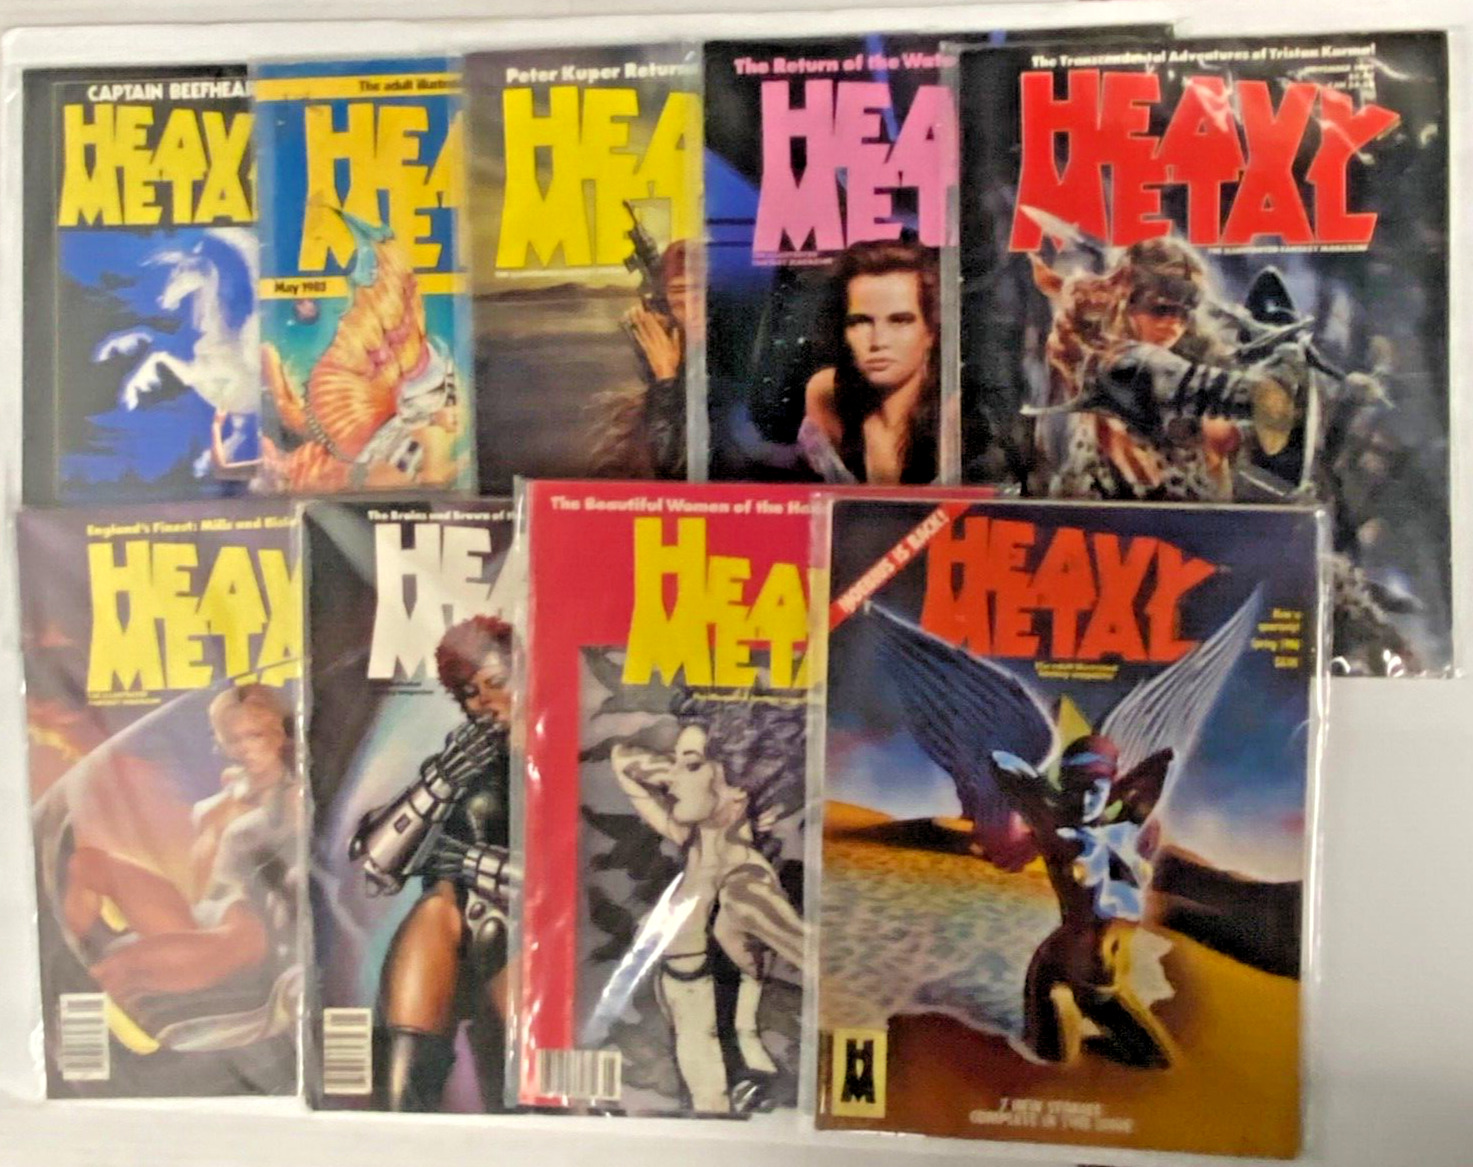 Great Lot of 9 Vintage Heavy Metal Magazines from the 80s & 90s.